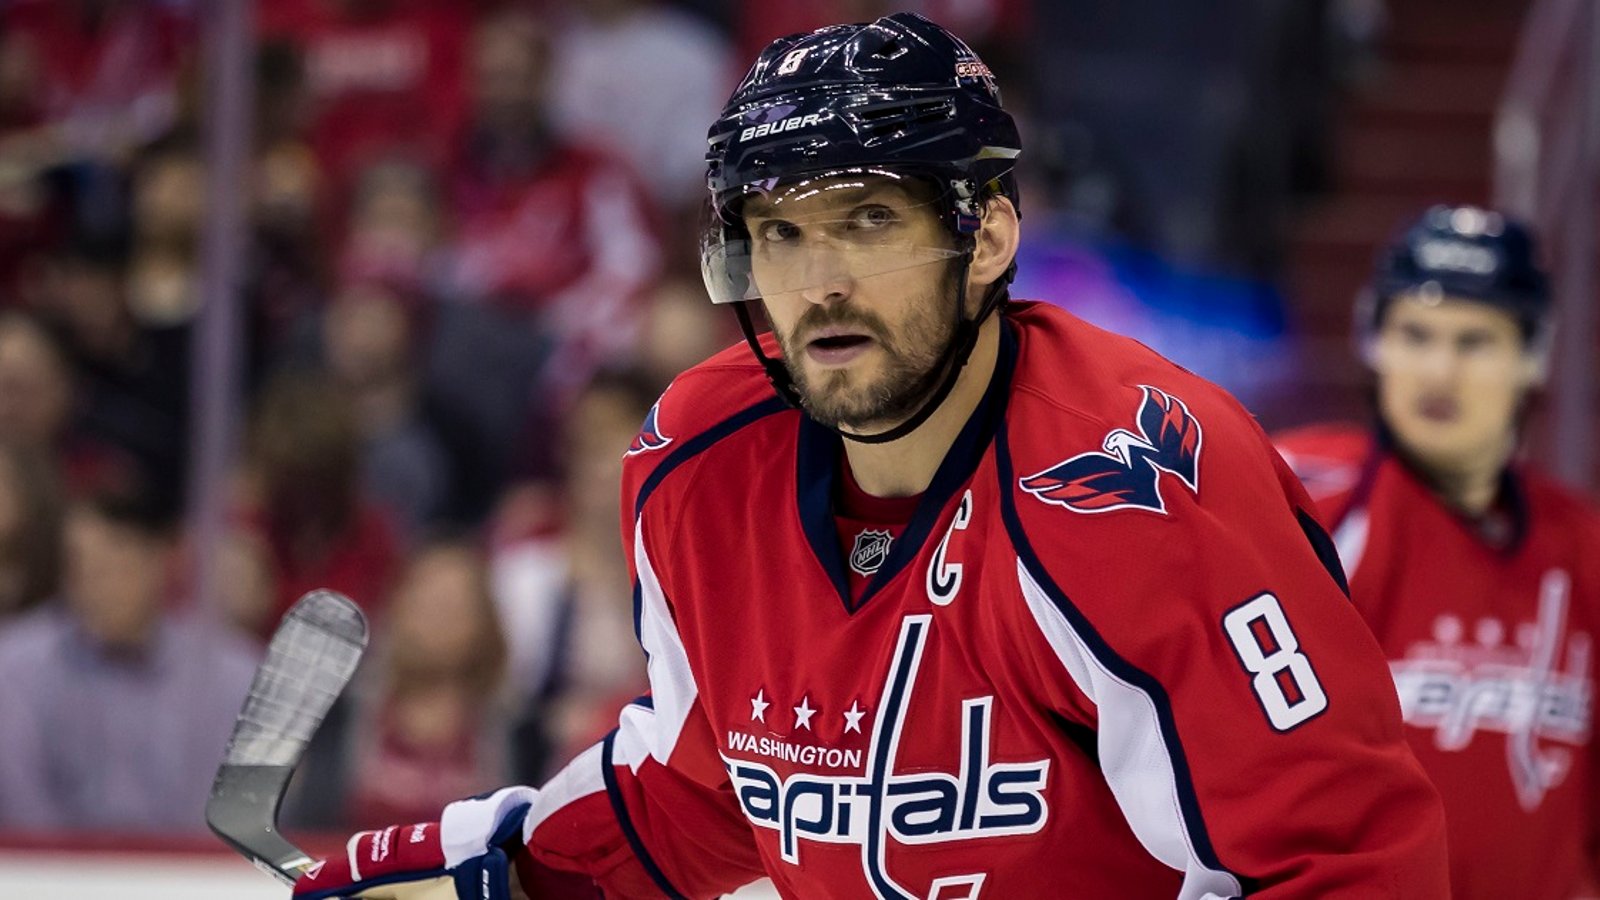 Head of Russian hockey has some bad news for Alex Ovechkin.